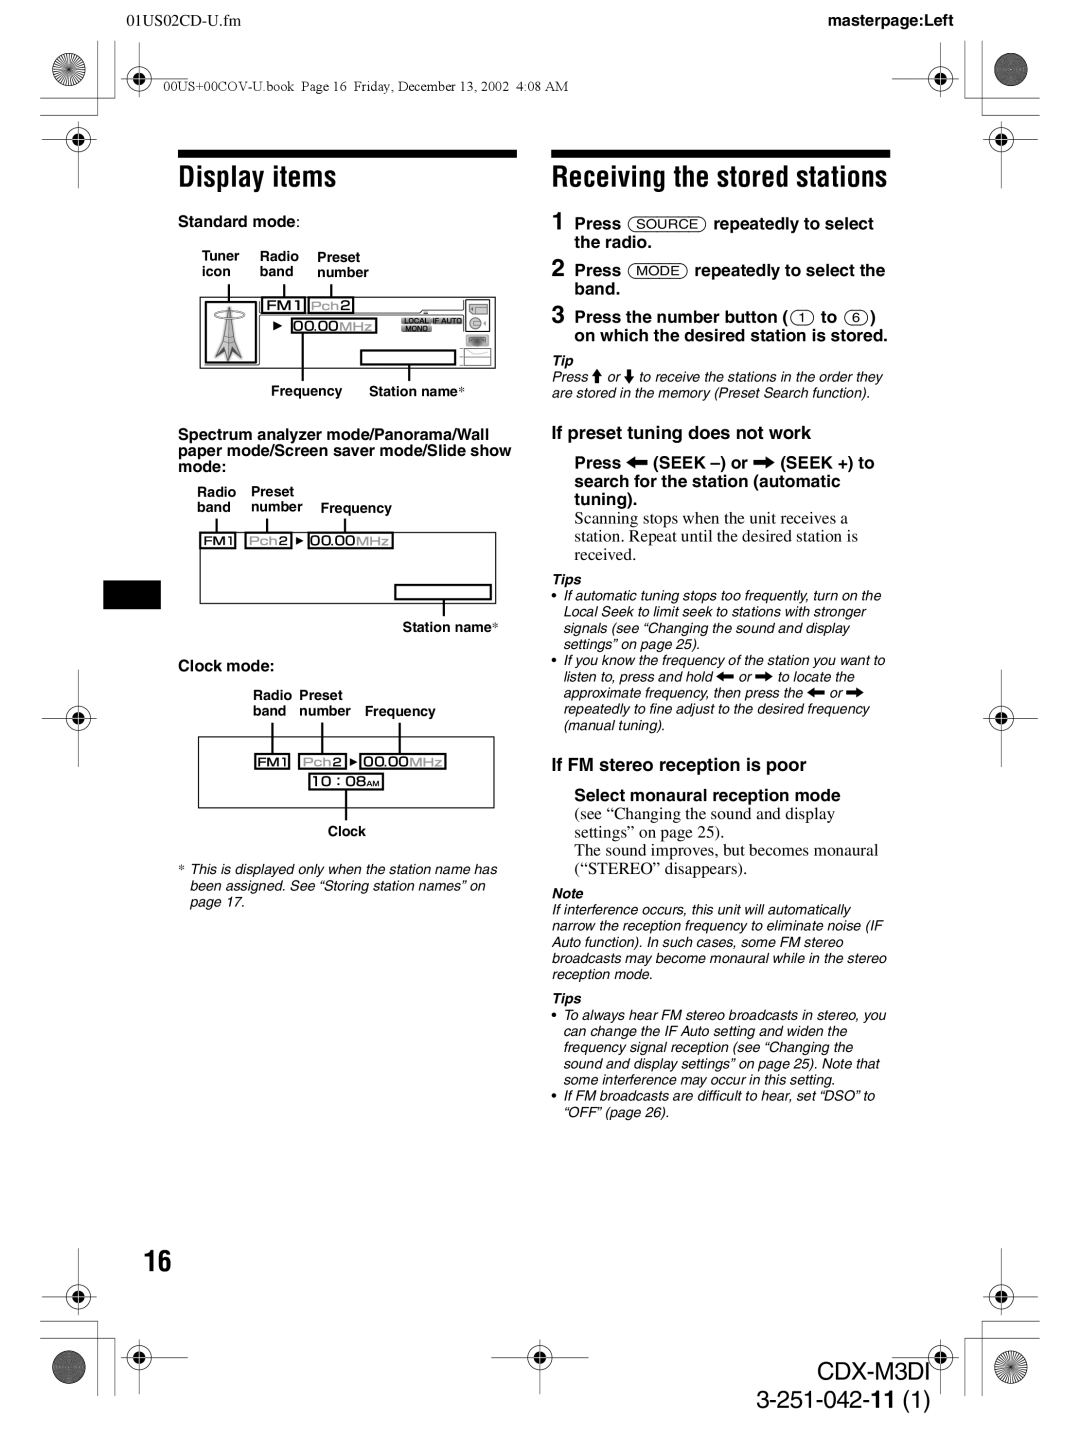 Sony CDX-M3DI operating instructions Receiving the stored stations, Display items, 3-251-042-11, 01US02CD-U.fm 